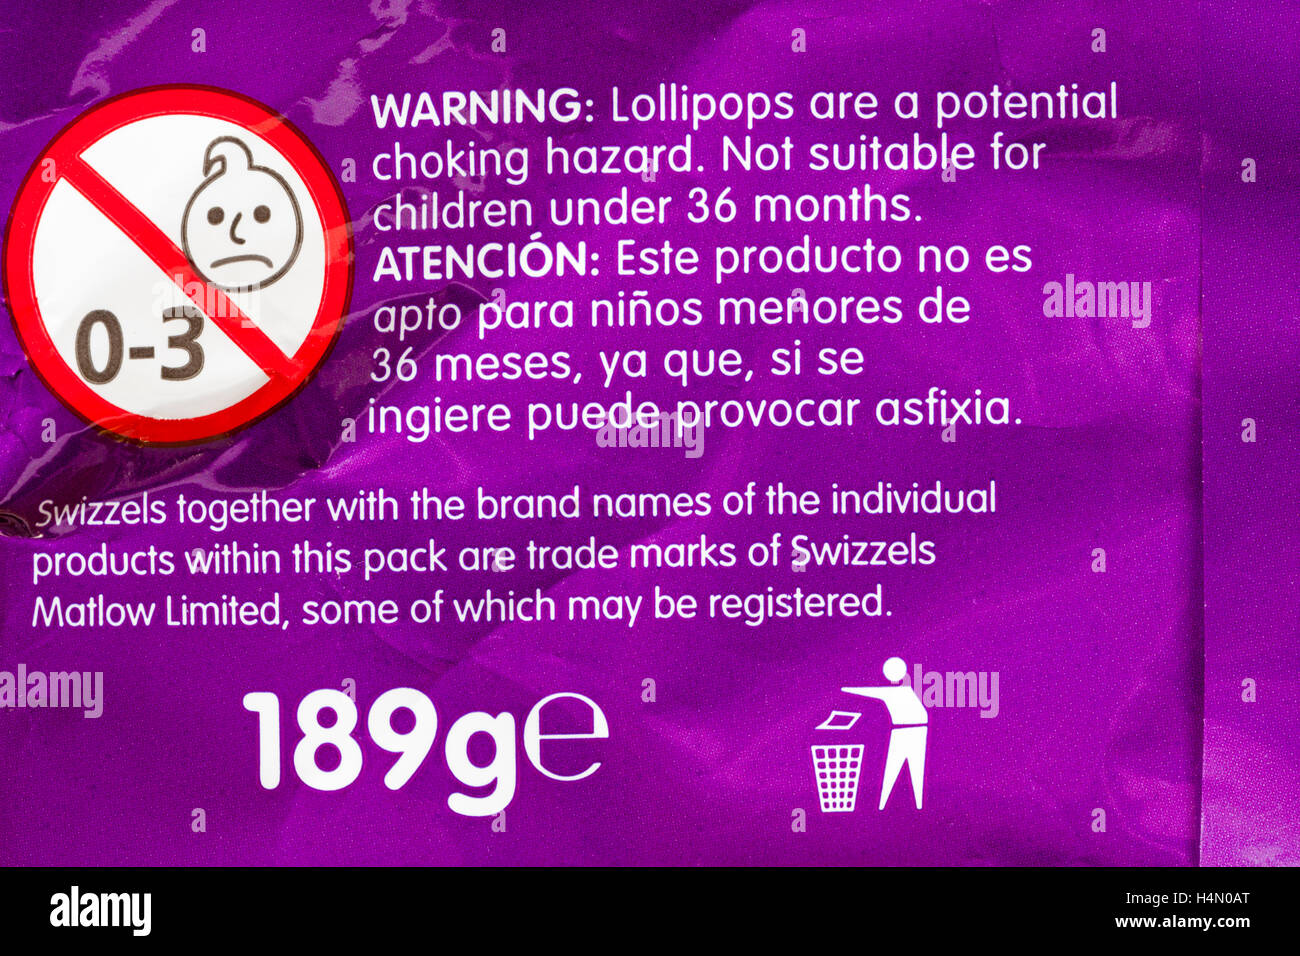 Warning lollipops are a potential choking hazard not suitable for children under 36 months - information on pack of Swizzels loadsa chews Stock Photo